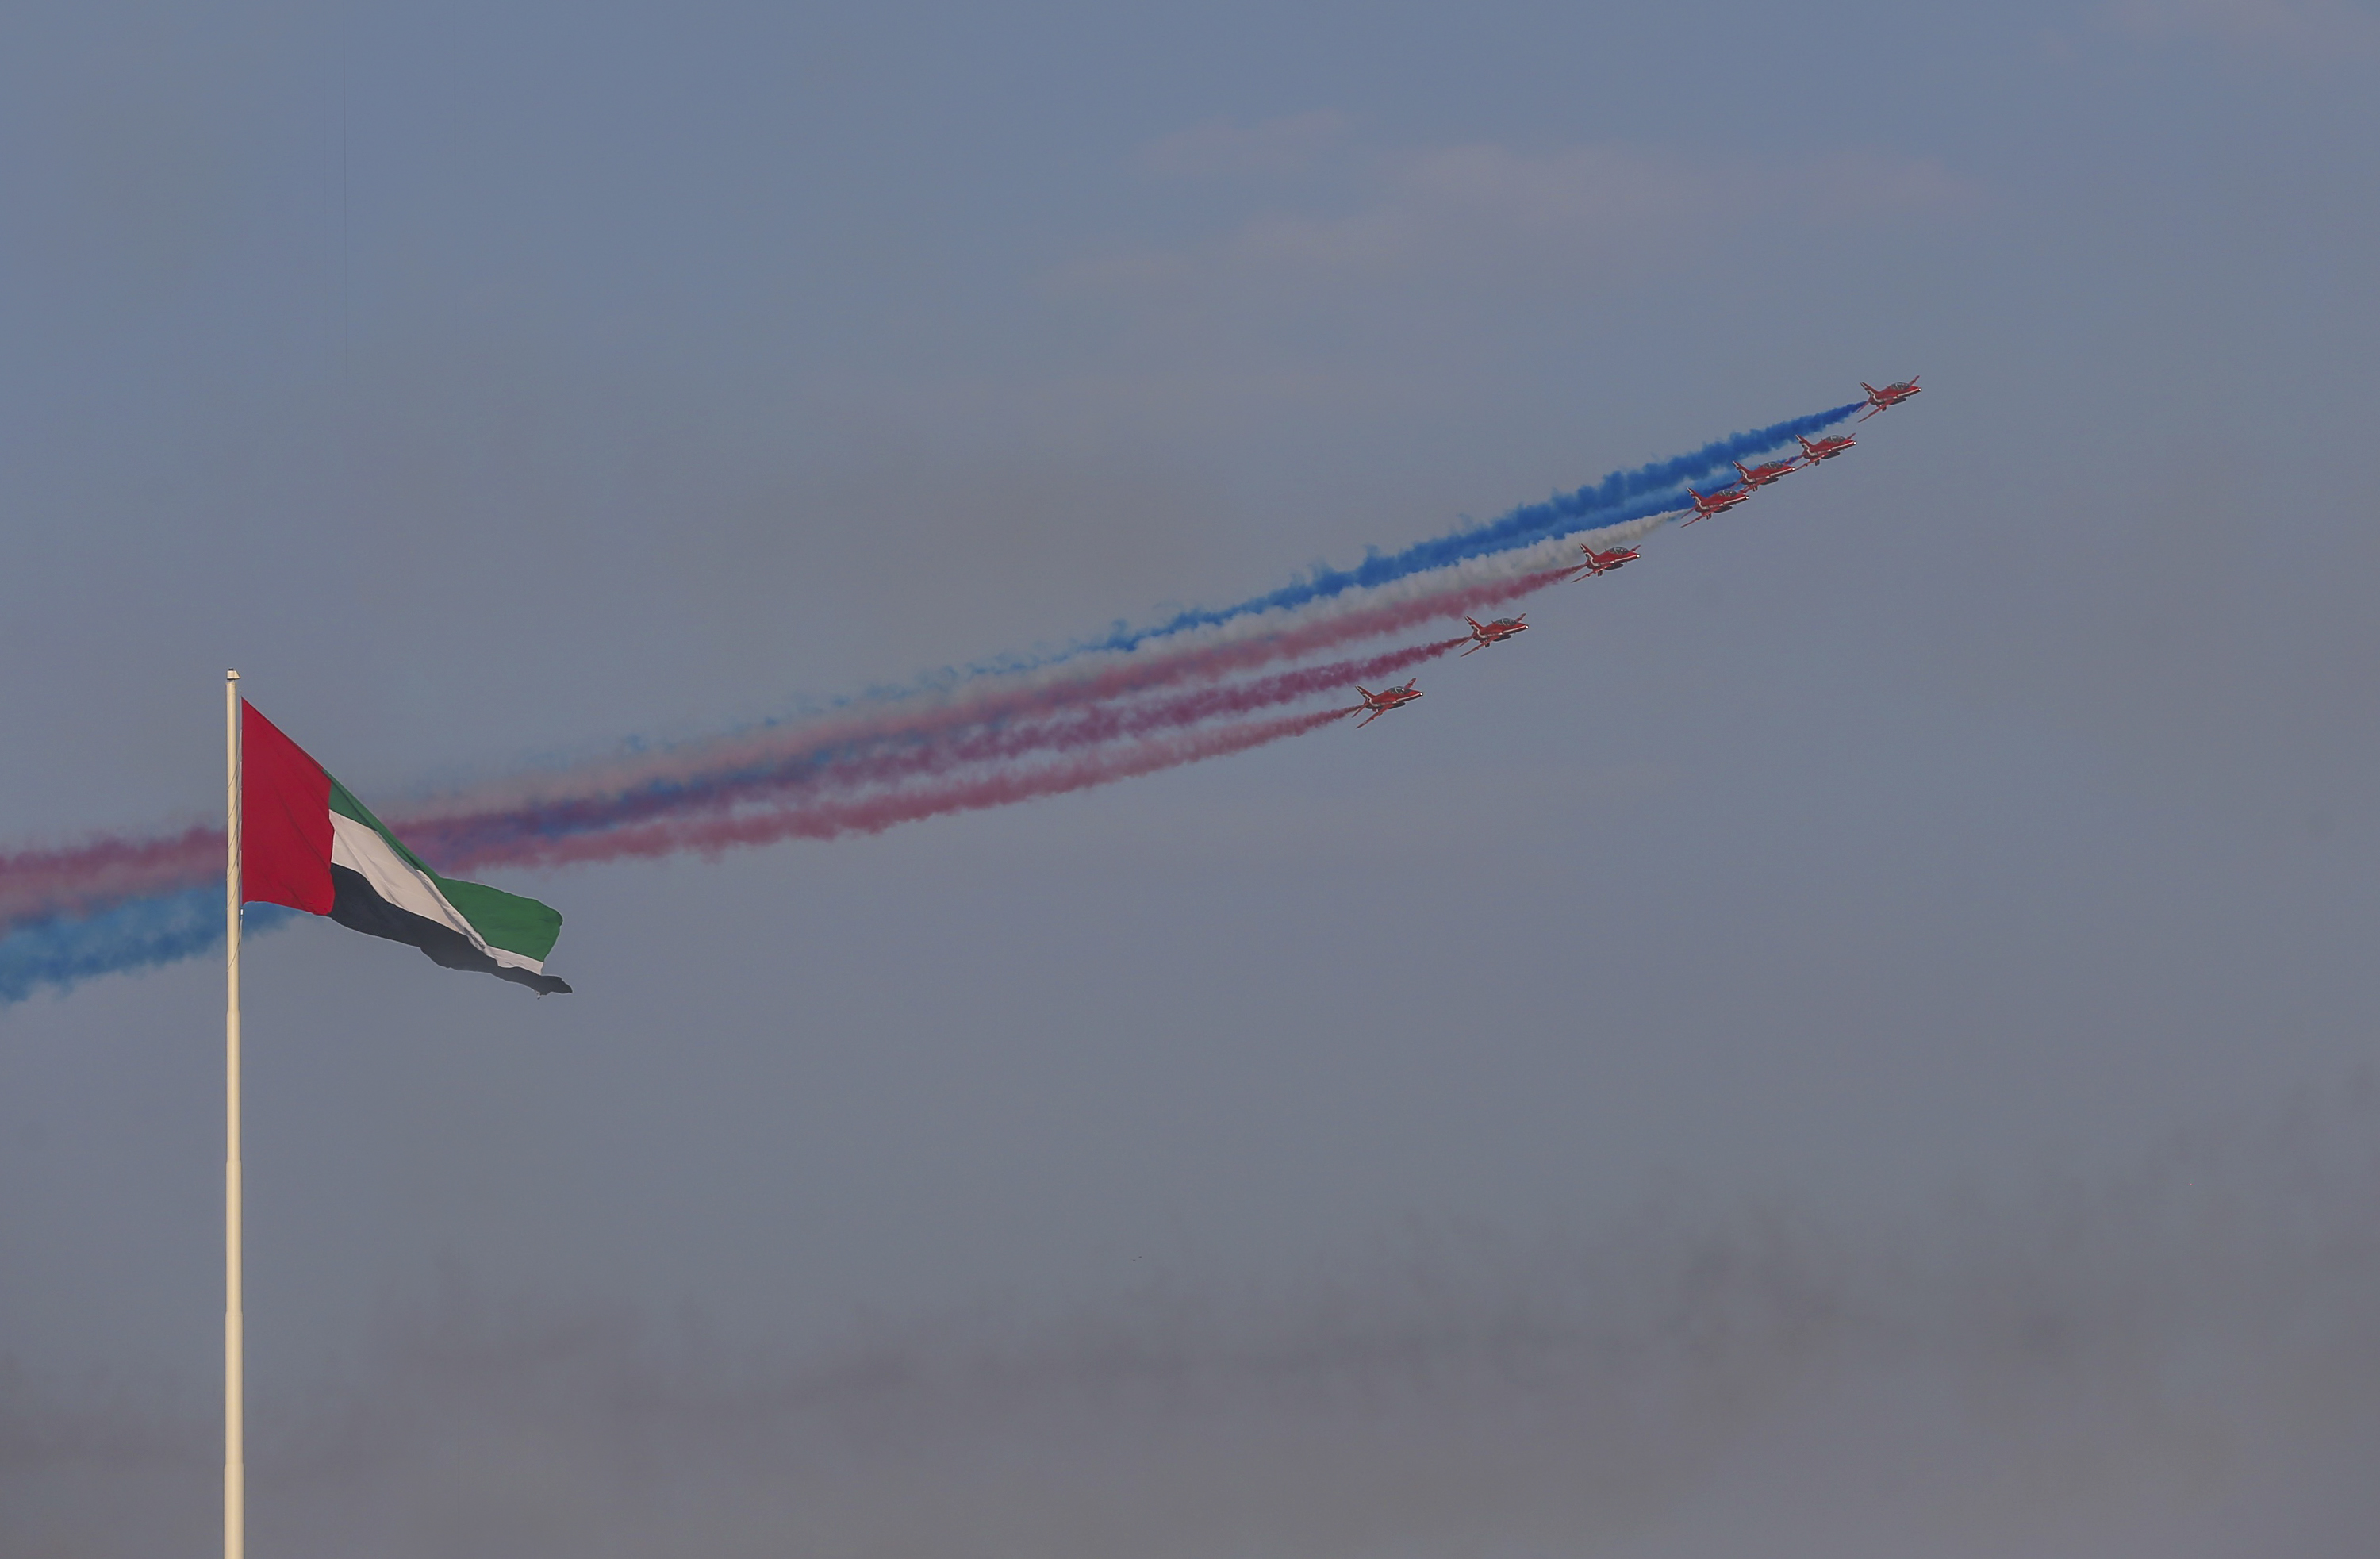 Red Arrows displaying in the UAE